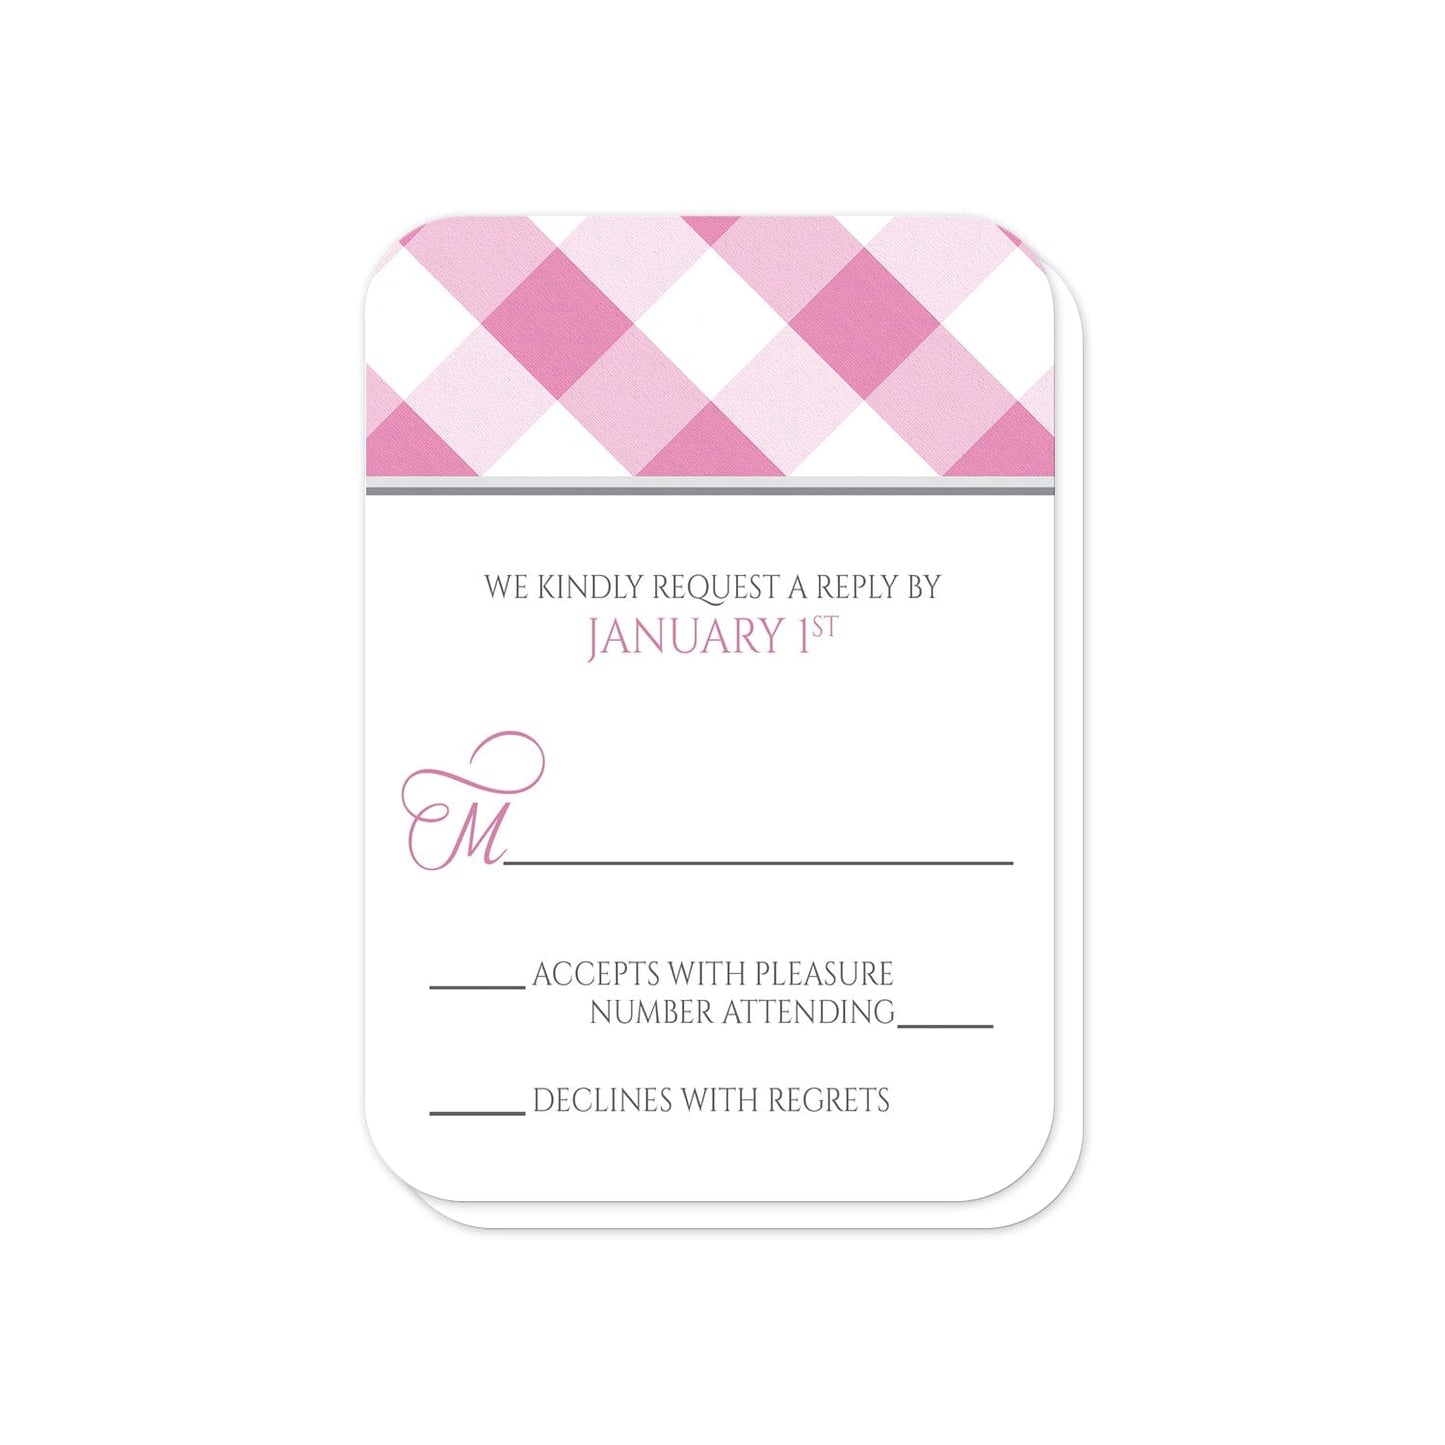 Pink Gingham RSVP Cards (with rounded corners) at Artistically Invited.